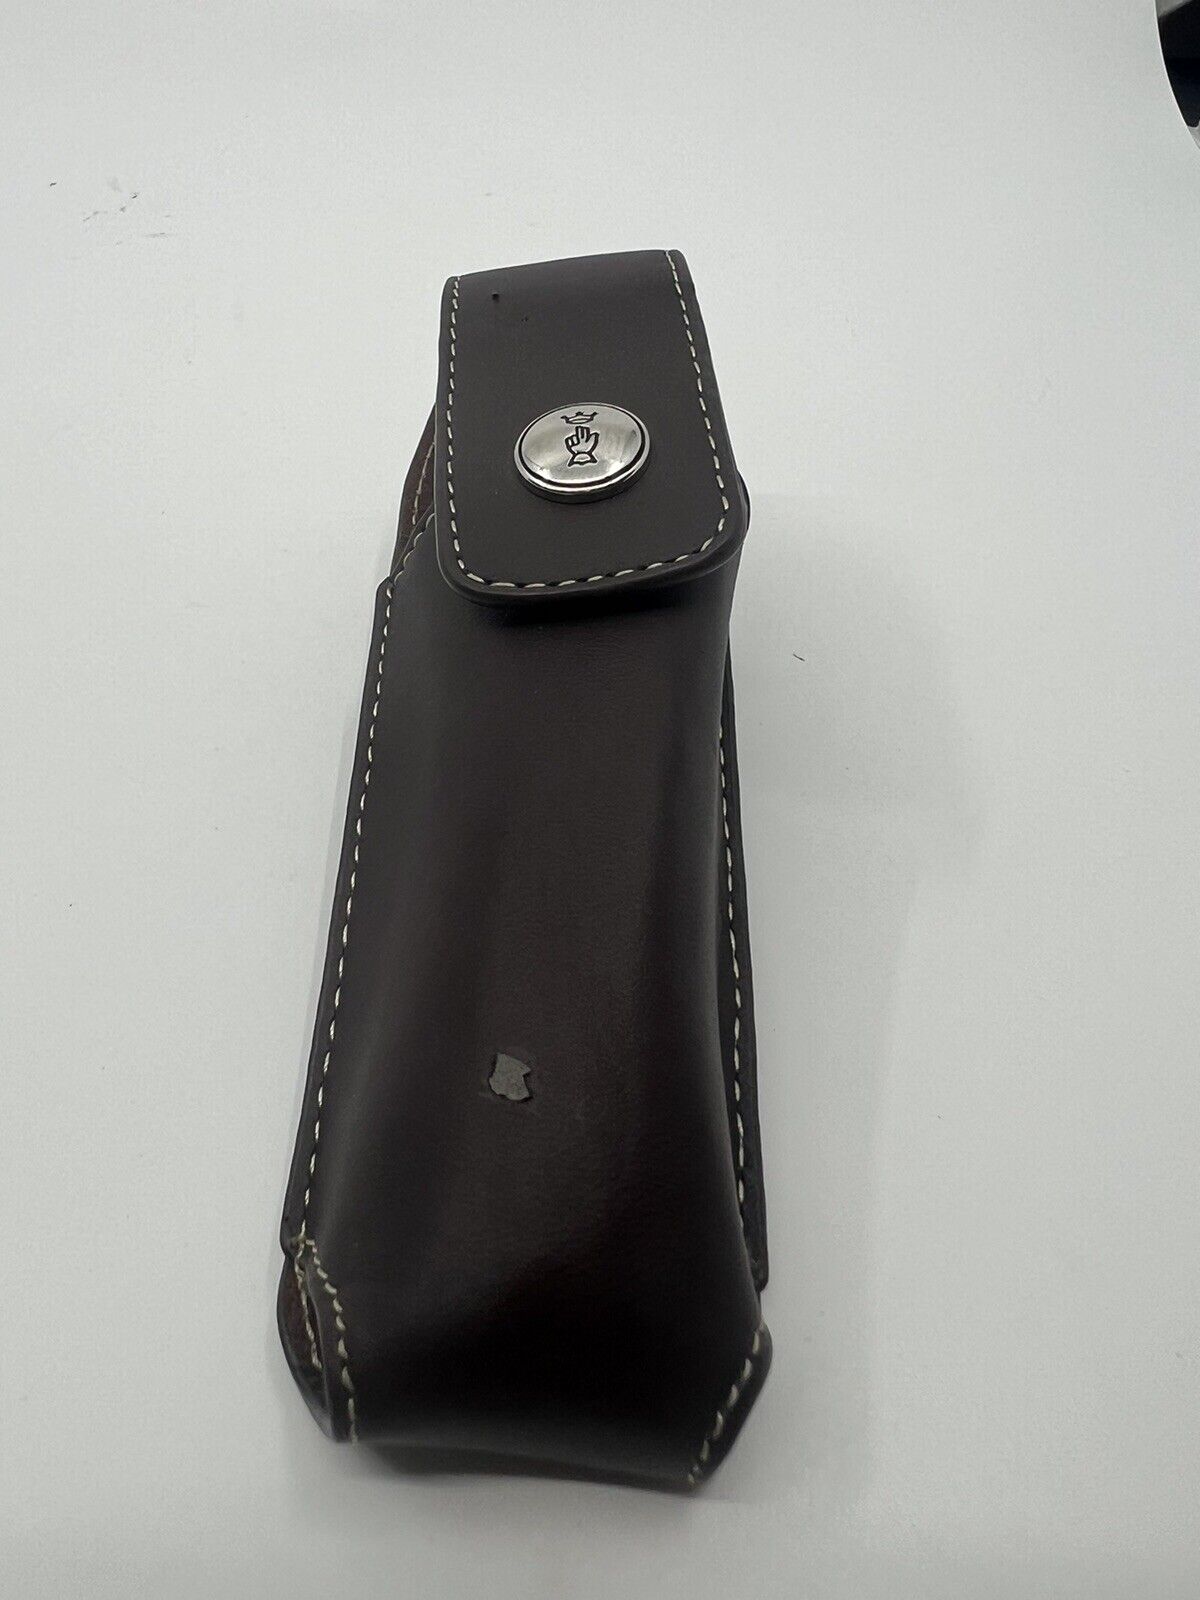 Opinel Leather Knife Sheath. Sheath Only, No Knife. Snap Close. Belt Loop. Brown